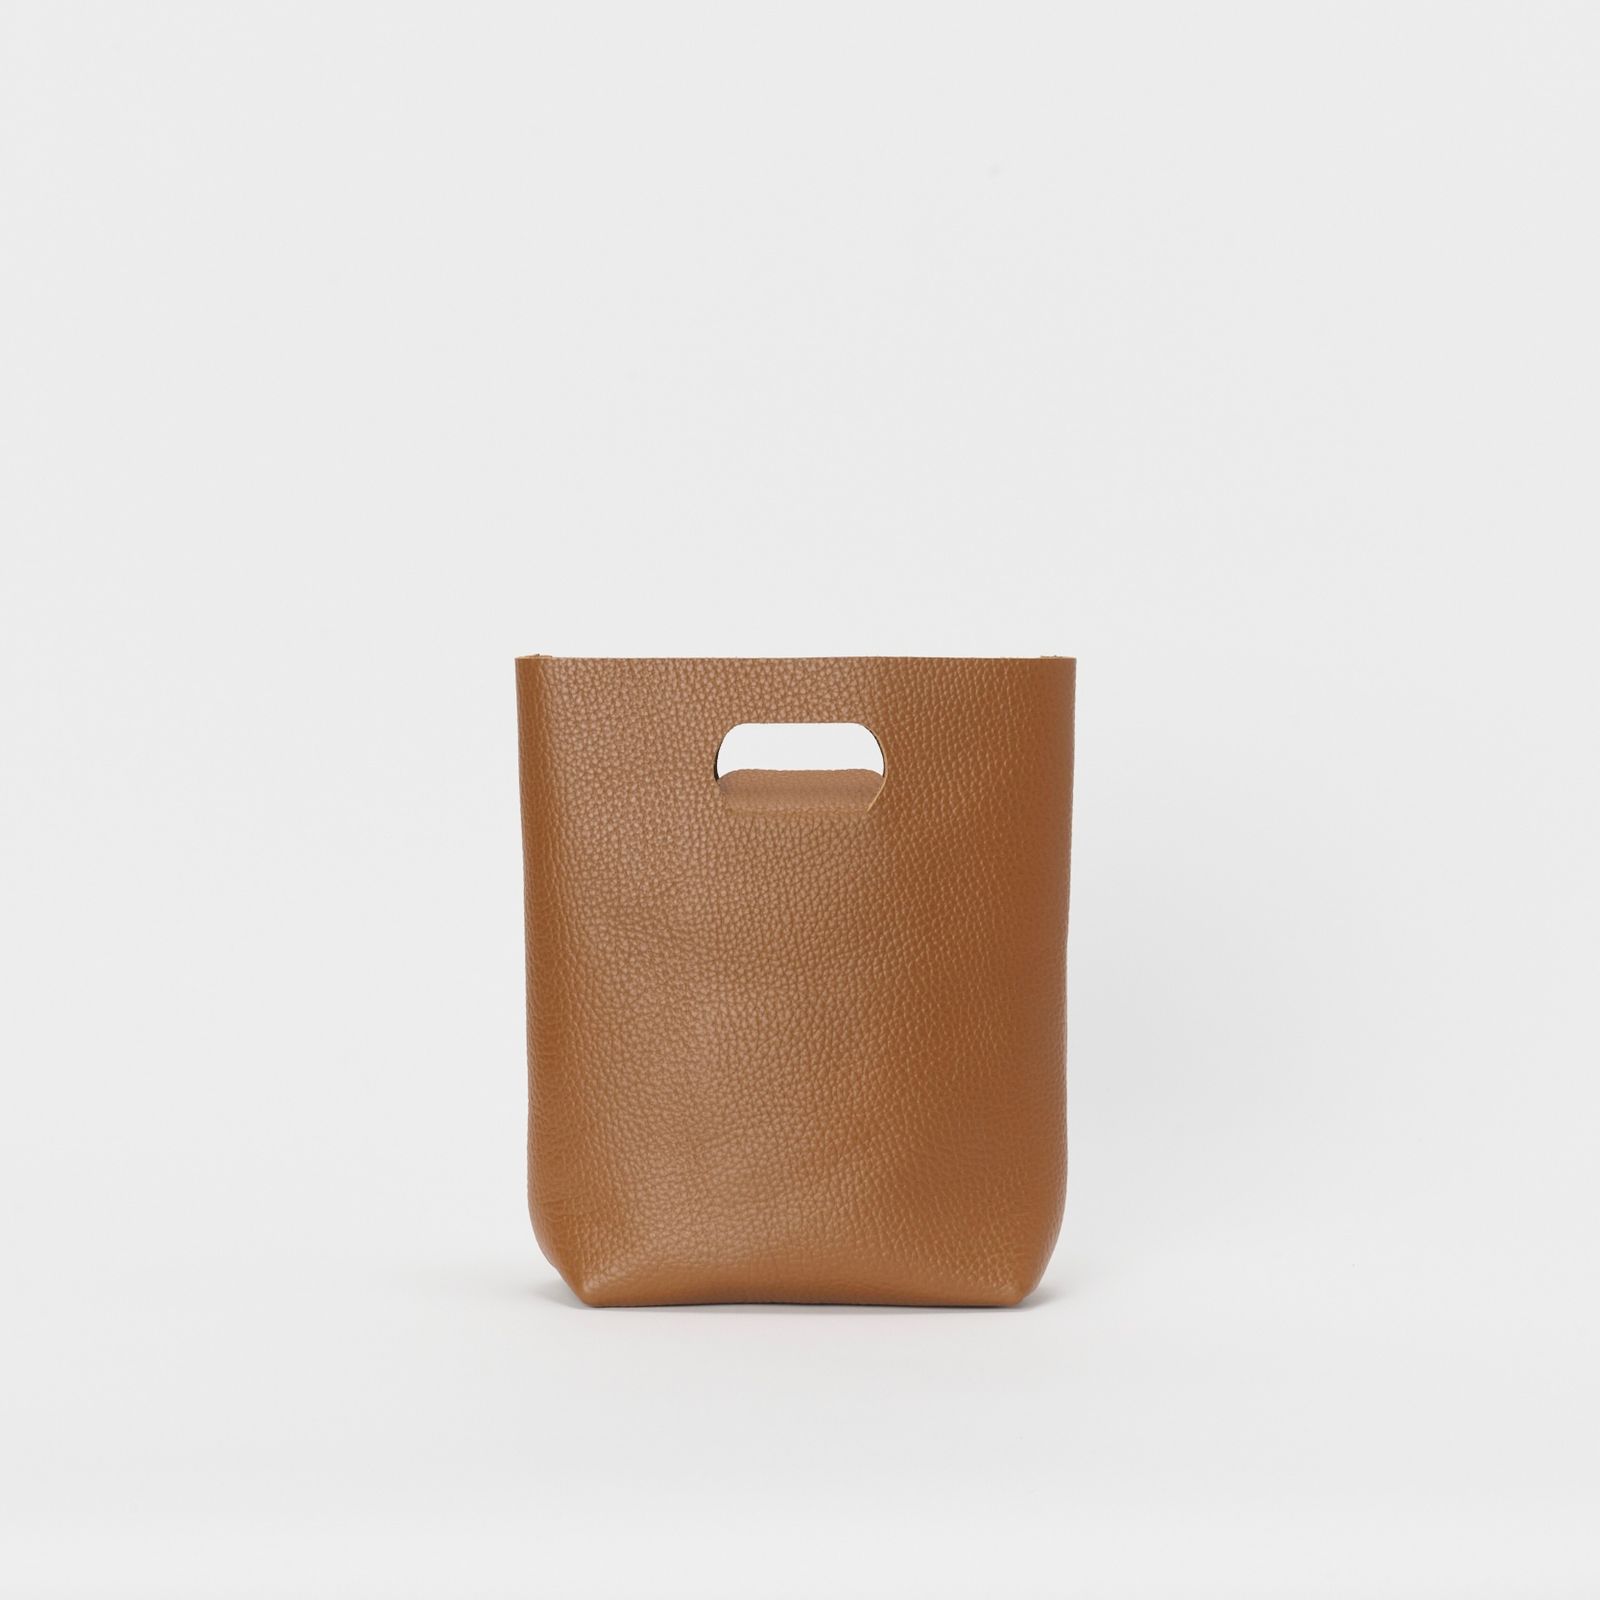 Hender Scheme - 【残りわずか】Not Eco Bag Small(TAUPE) | ACRMTSM 